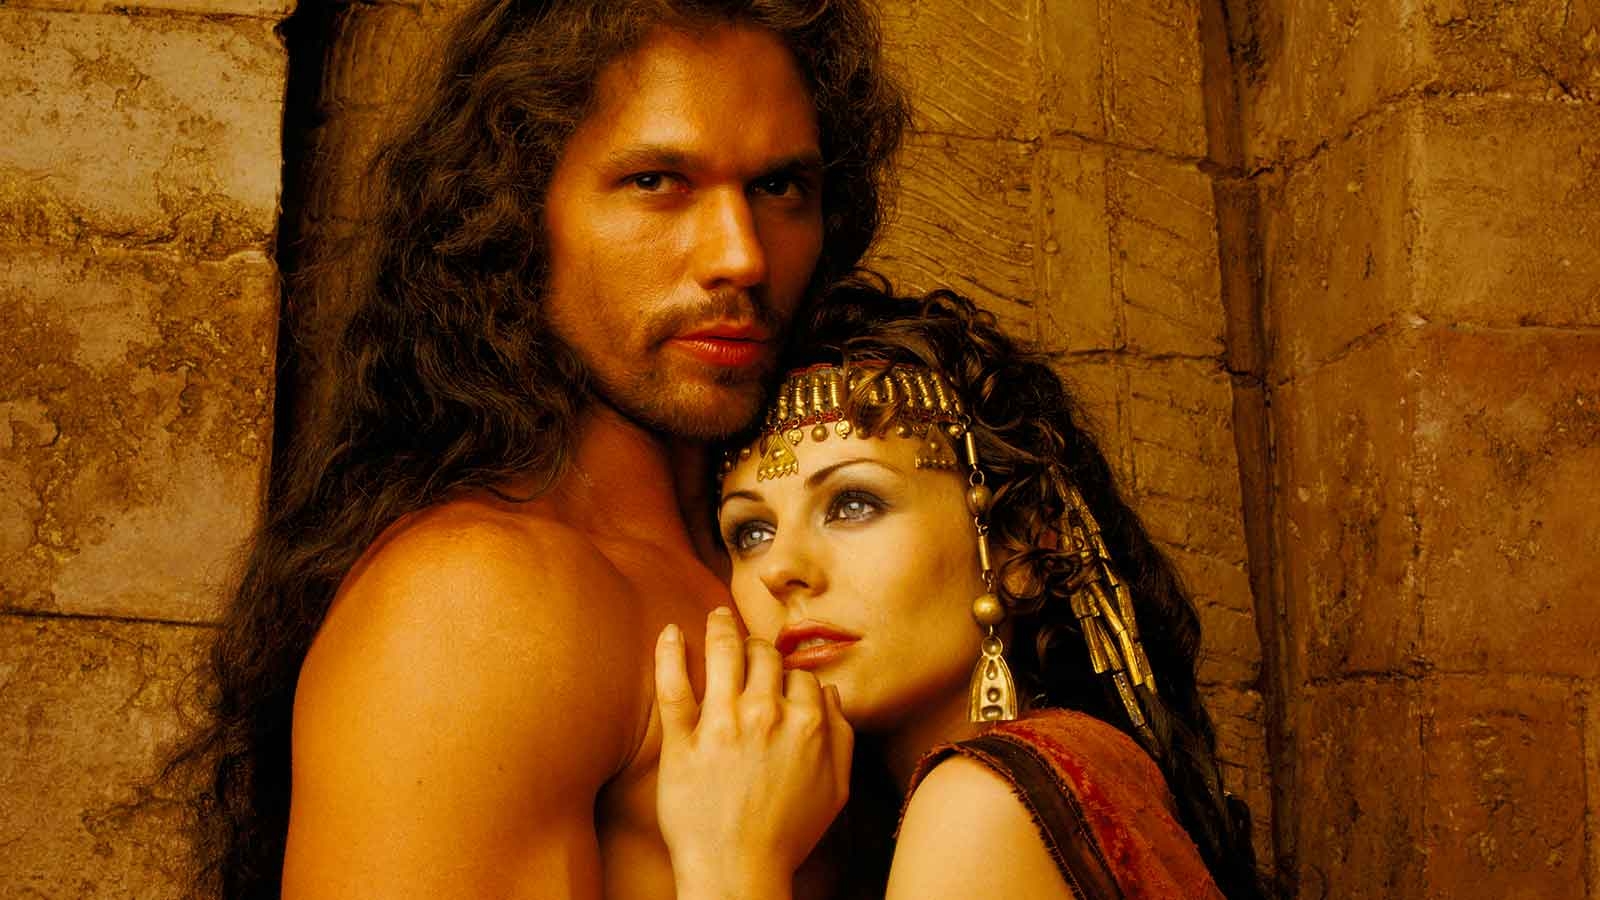 samson and delilah 1996 movie free download